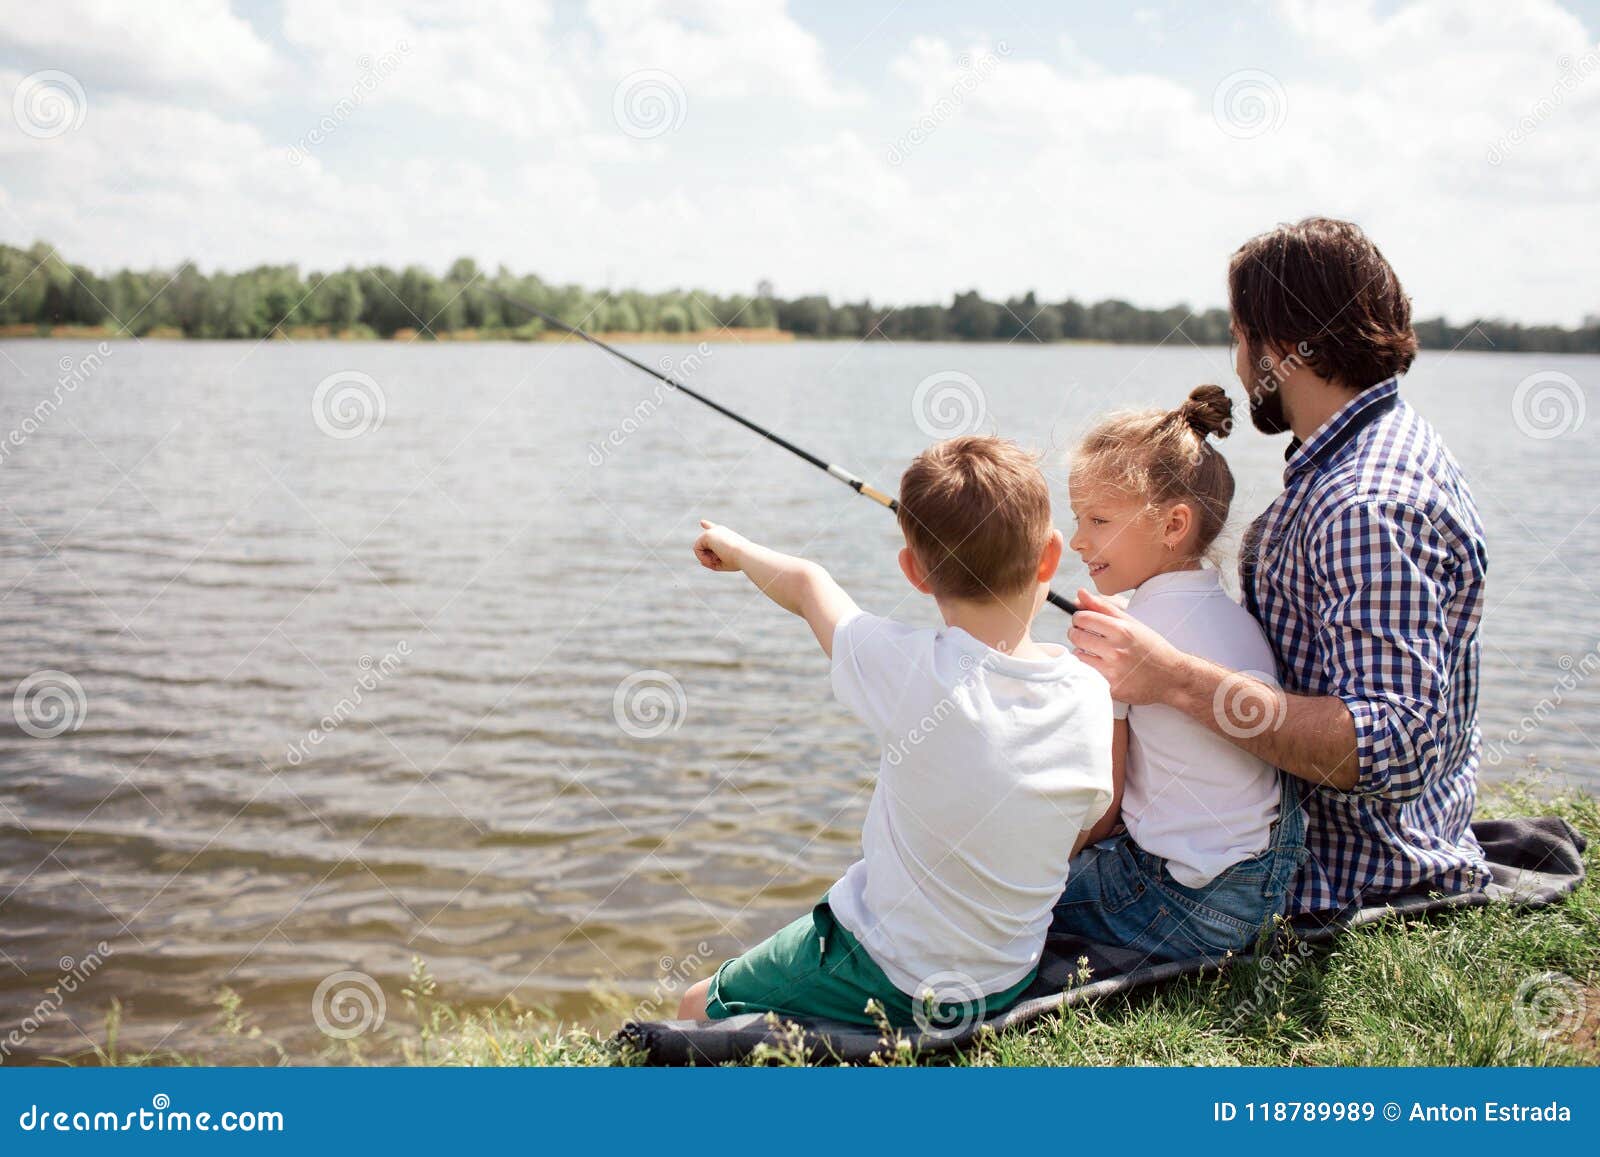 A Picture of Man and His Children Sitting Together on the River Shore. Guy  is Fishing while His Kids are Watching on it Stock Image - Image of child,  horizontal: 118789989